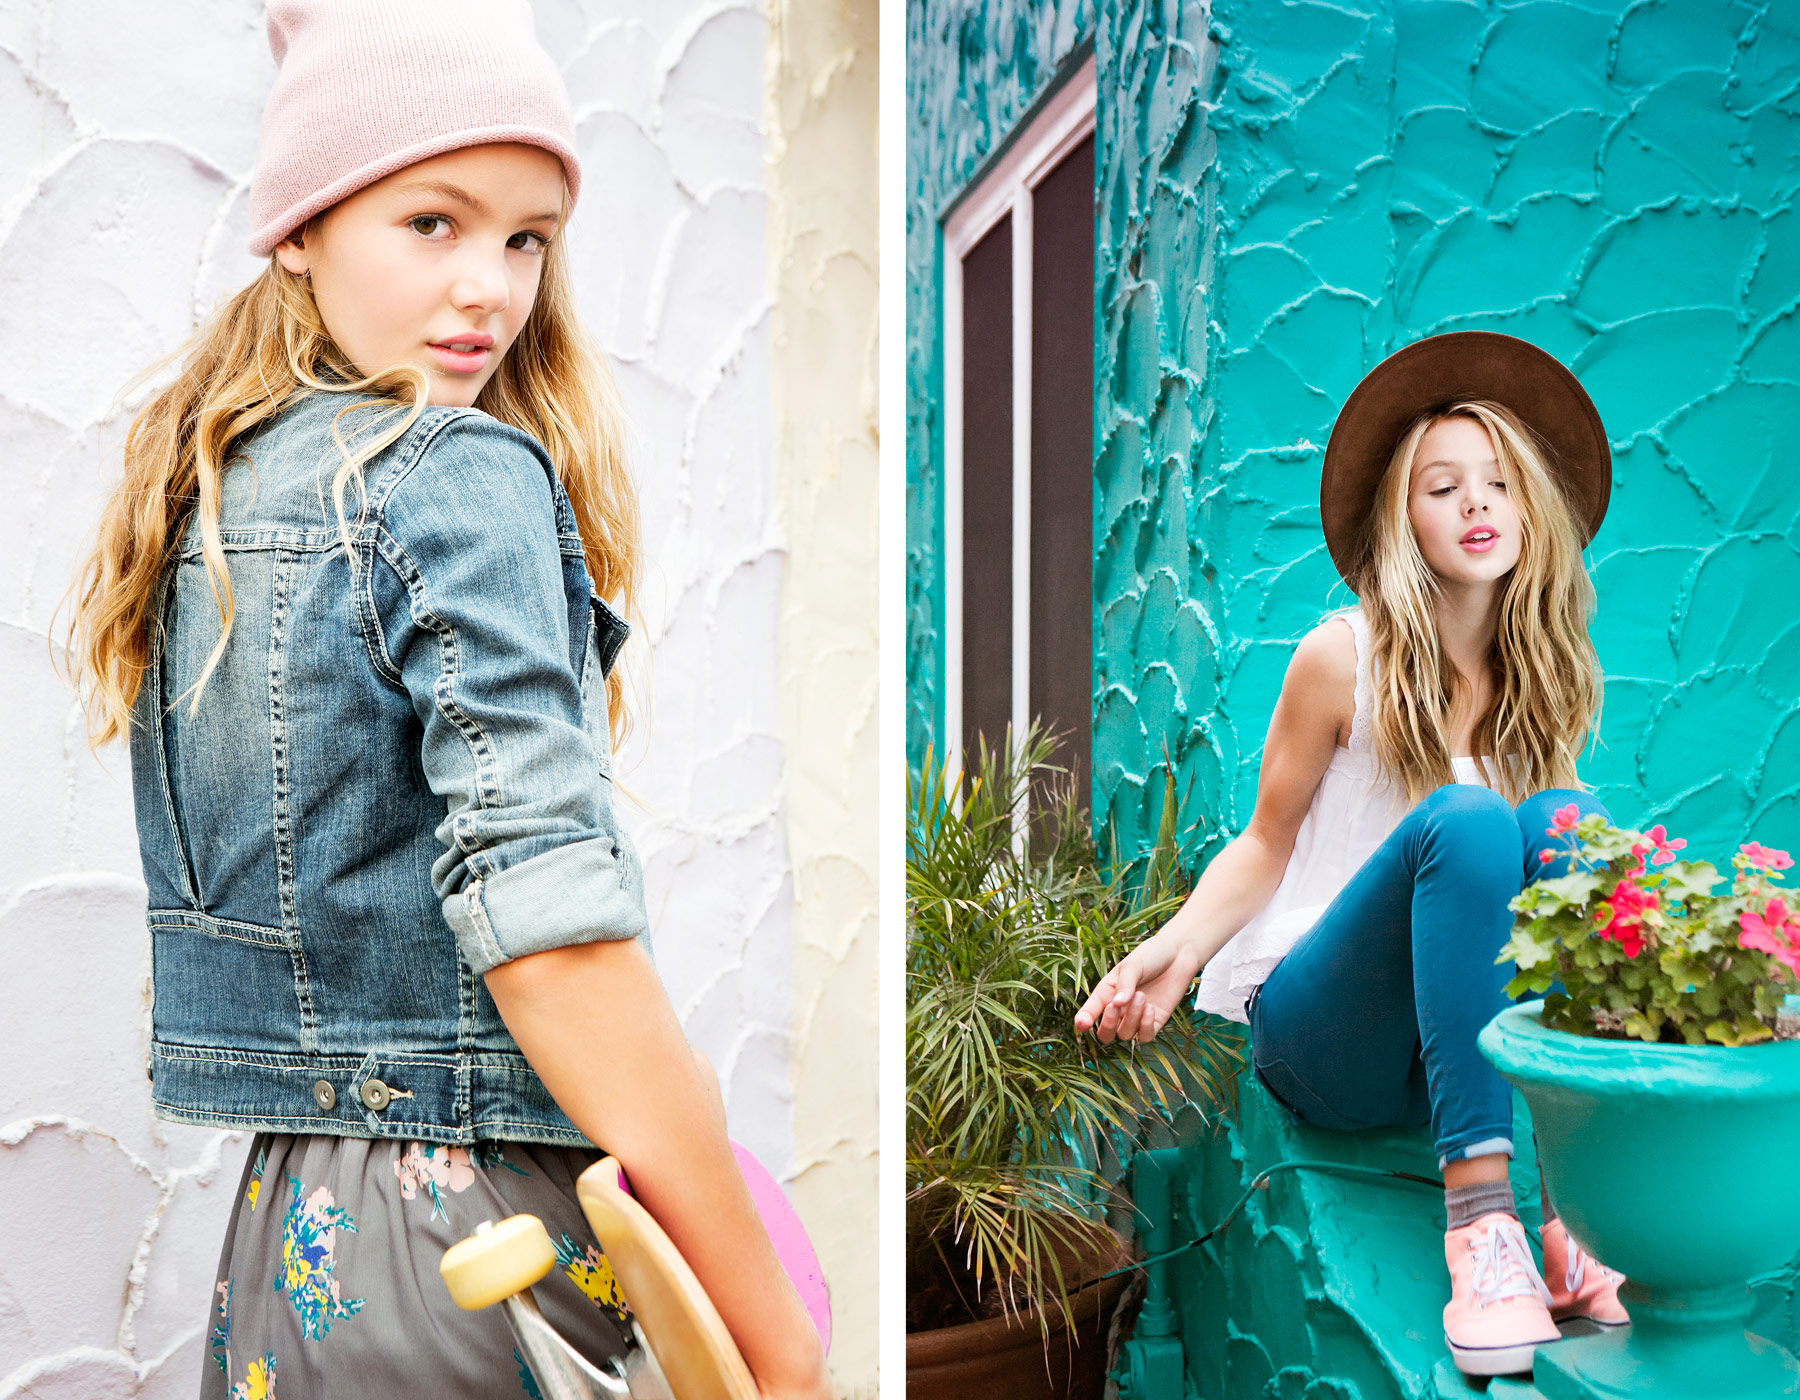 Jenna Alcala is a Fashion-Lifestyle, Beauty & Kids Photographer based in San Francisco and Los Angeles